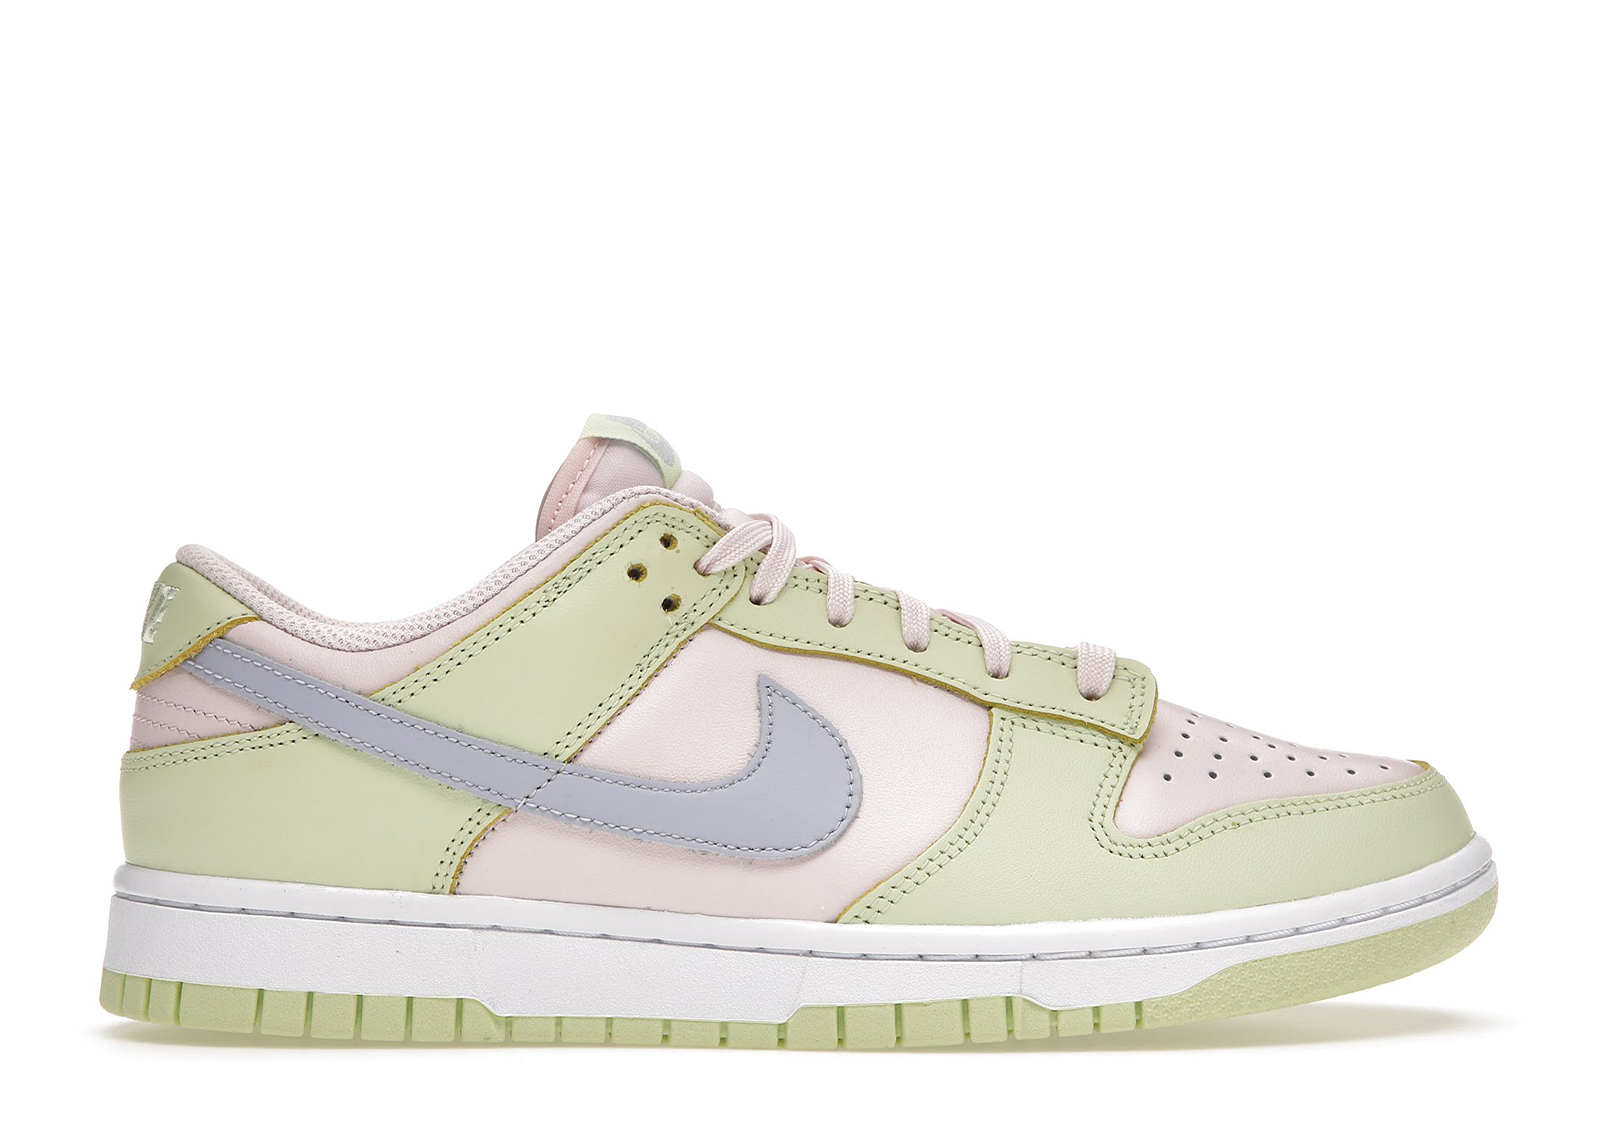 Nike Dunk Low Lime Ice (Women's) - DD1503-600 - US